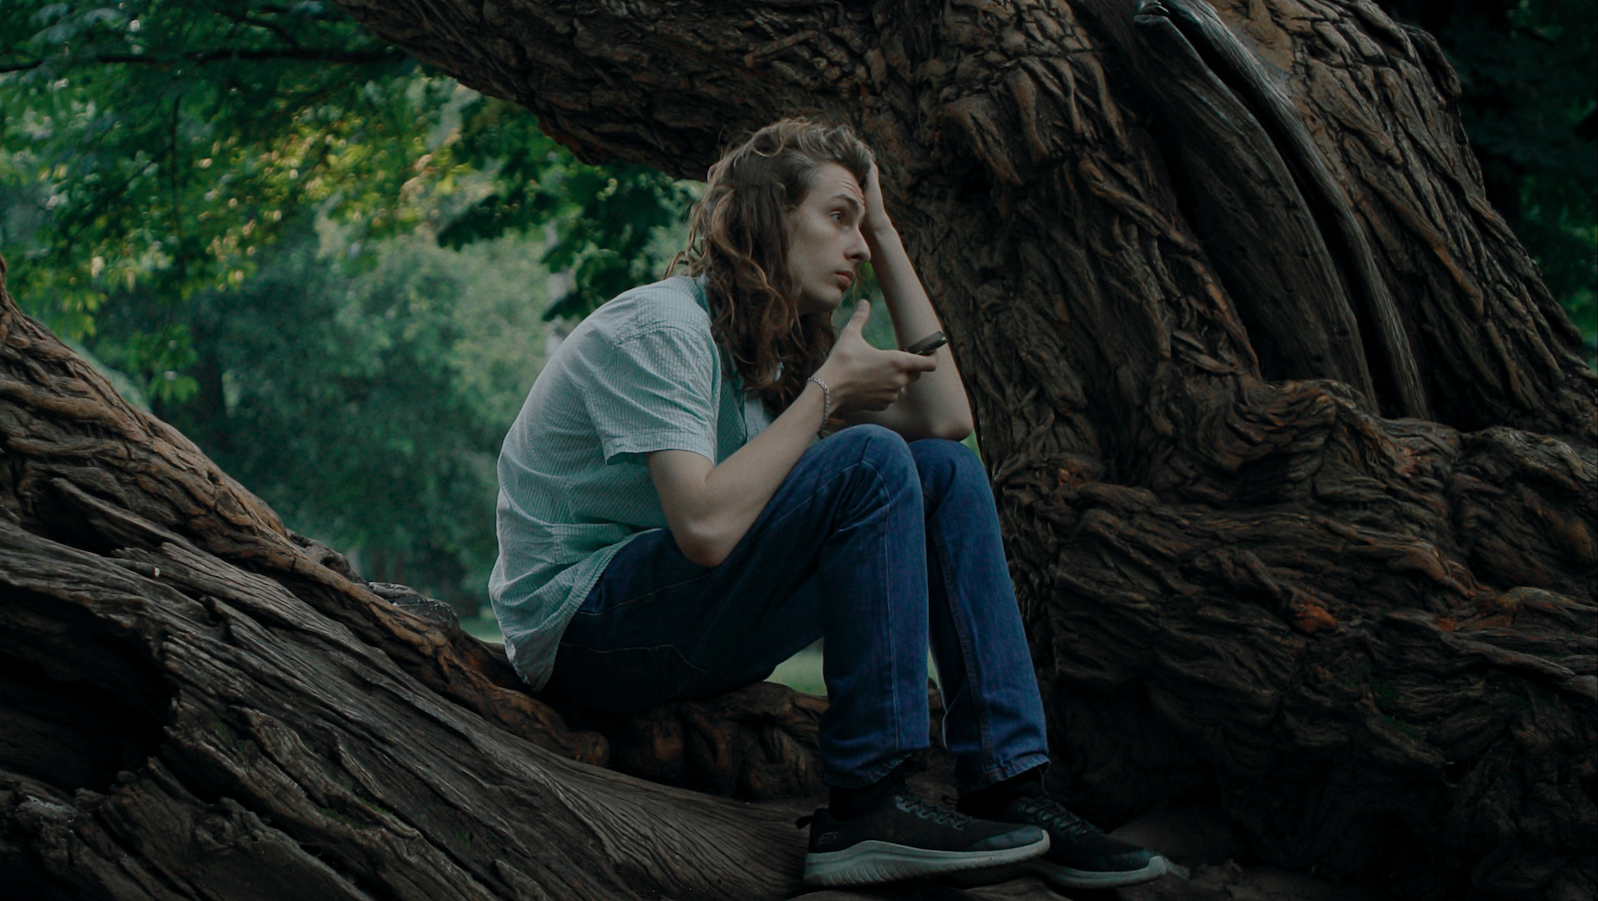 A young person with long hair sits on a tree in a forest holding a phone and looking into the distance